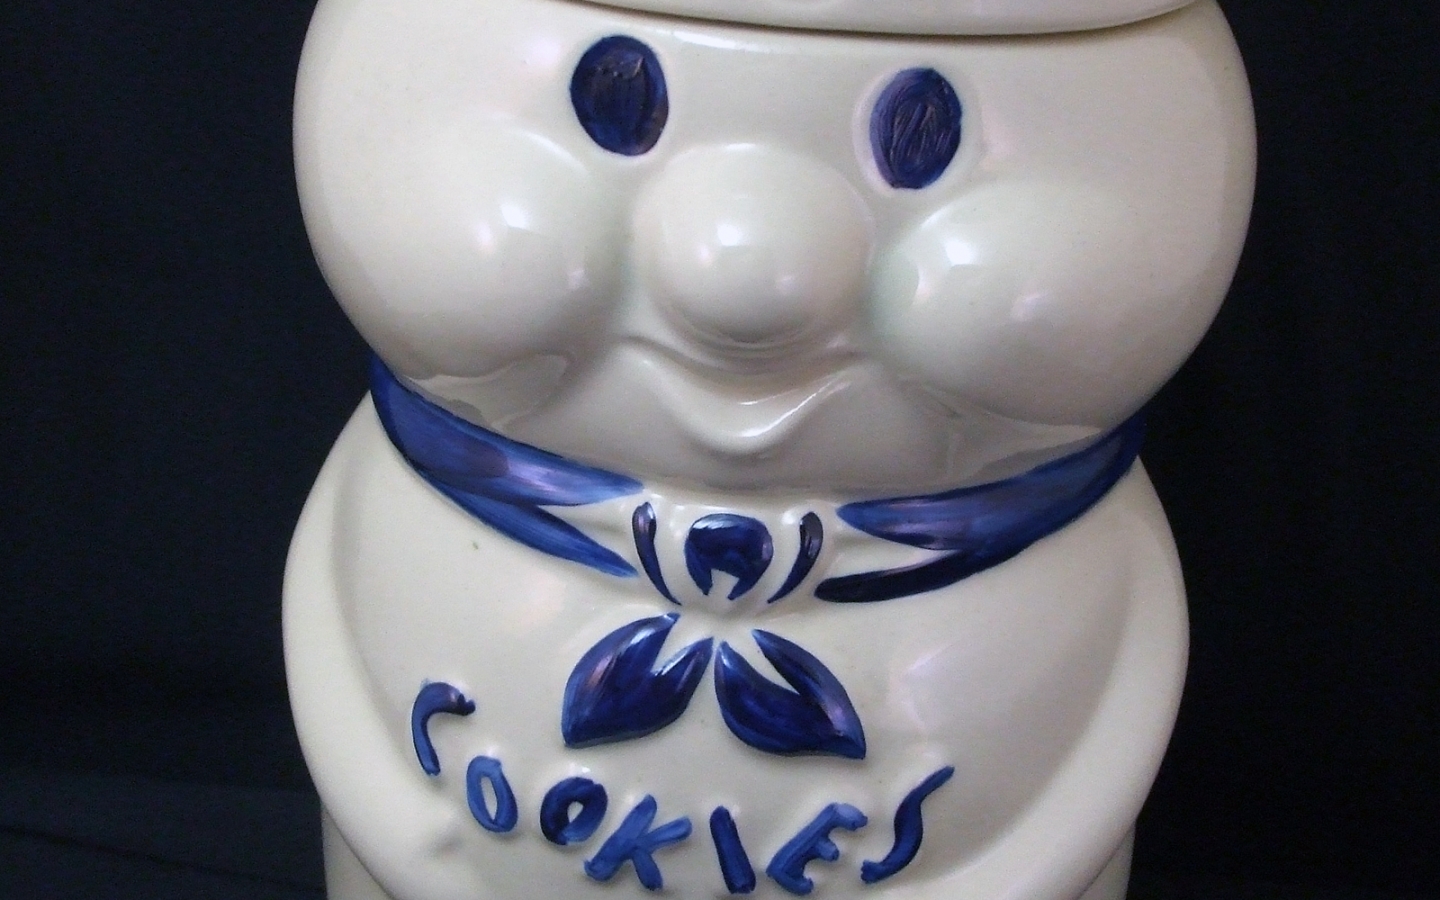 Free download Free download Pillsbury Doughboy Images ImagesExplore ...